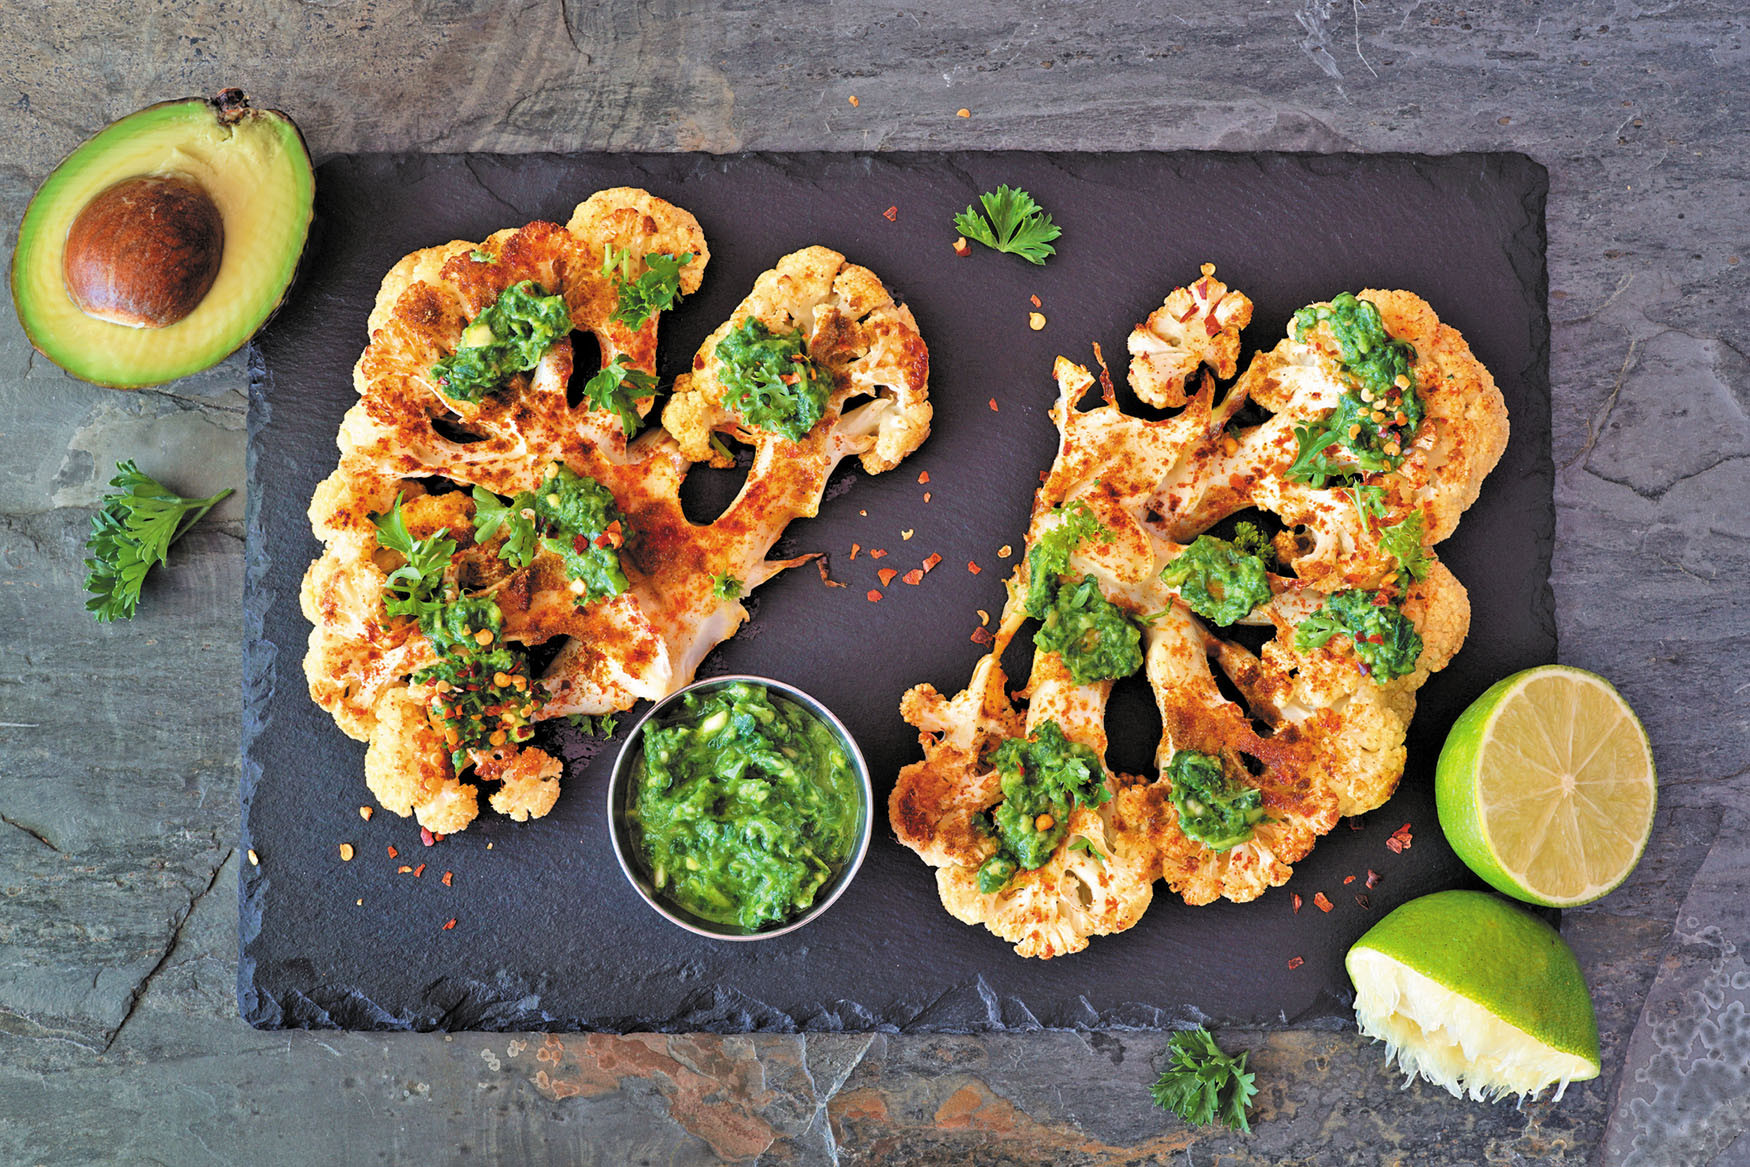 overhead view photo of grilled cauliflower ready for serving, sprinkled with herbs and surrounded by garnishes of avocado, lemon, and lime